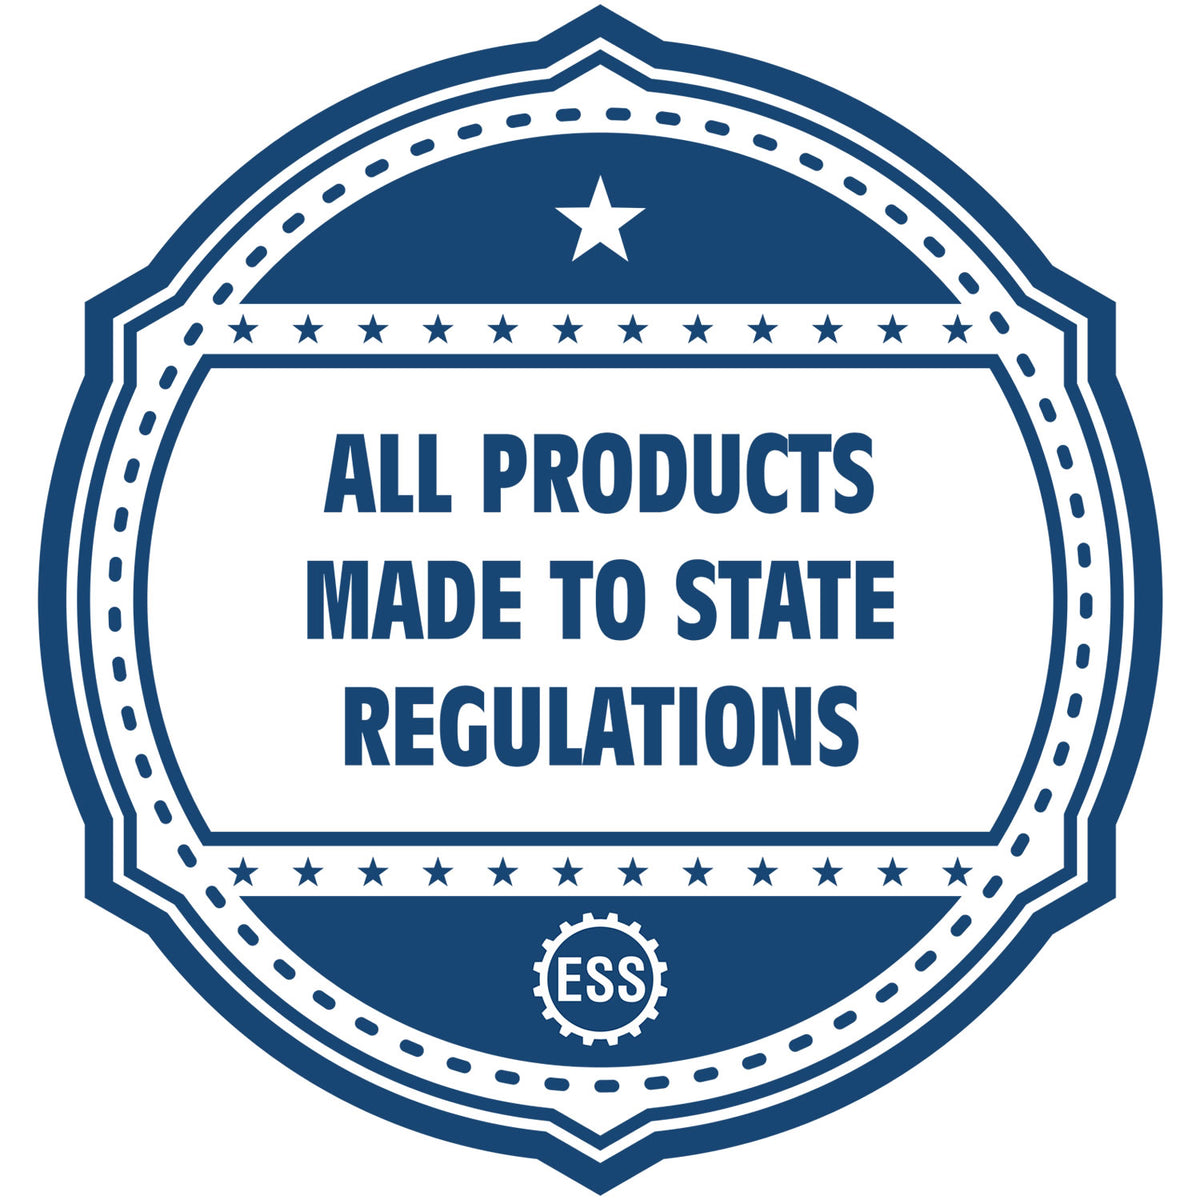 An icon or badge element for the Long Reach District of Columbia PE Seal showing that this product is made in compliance with state regulations.